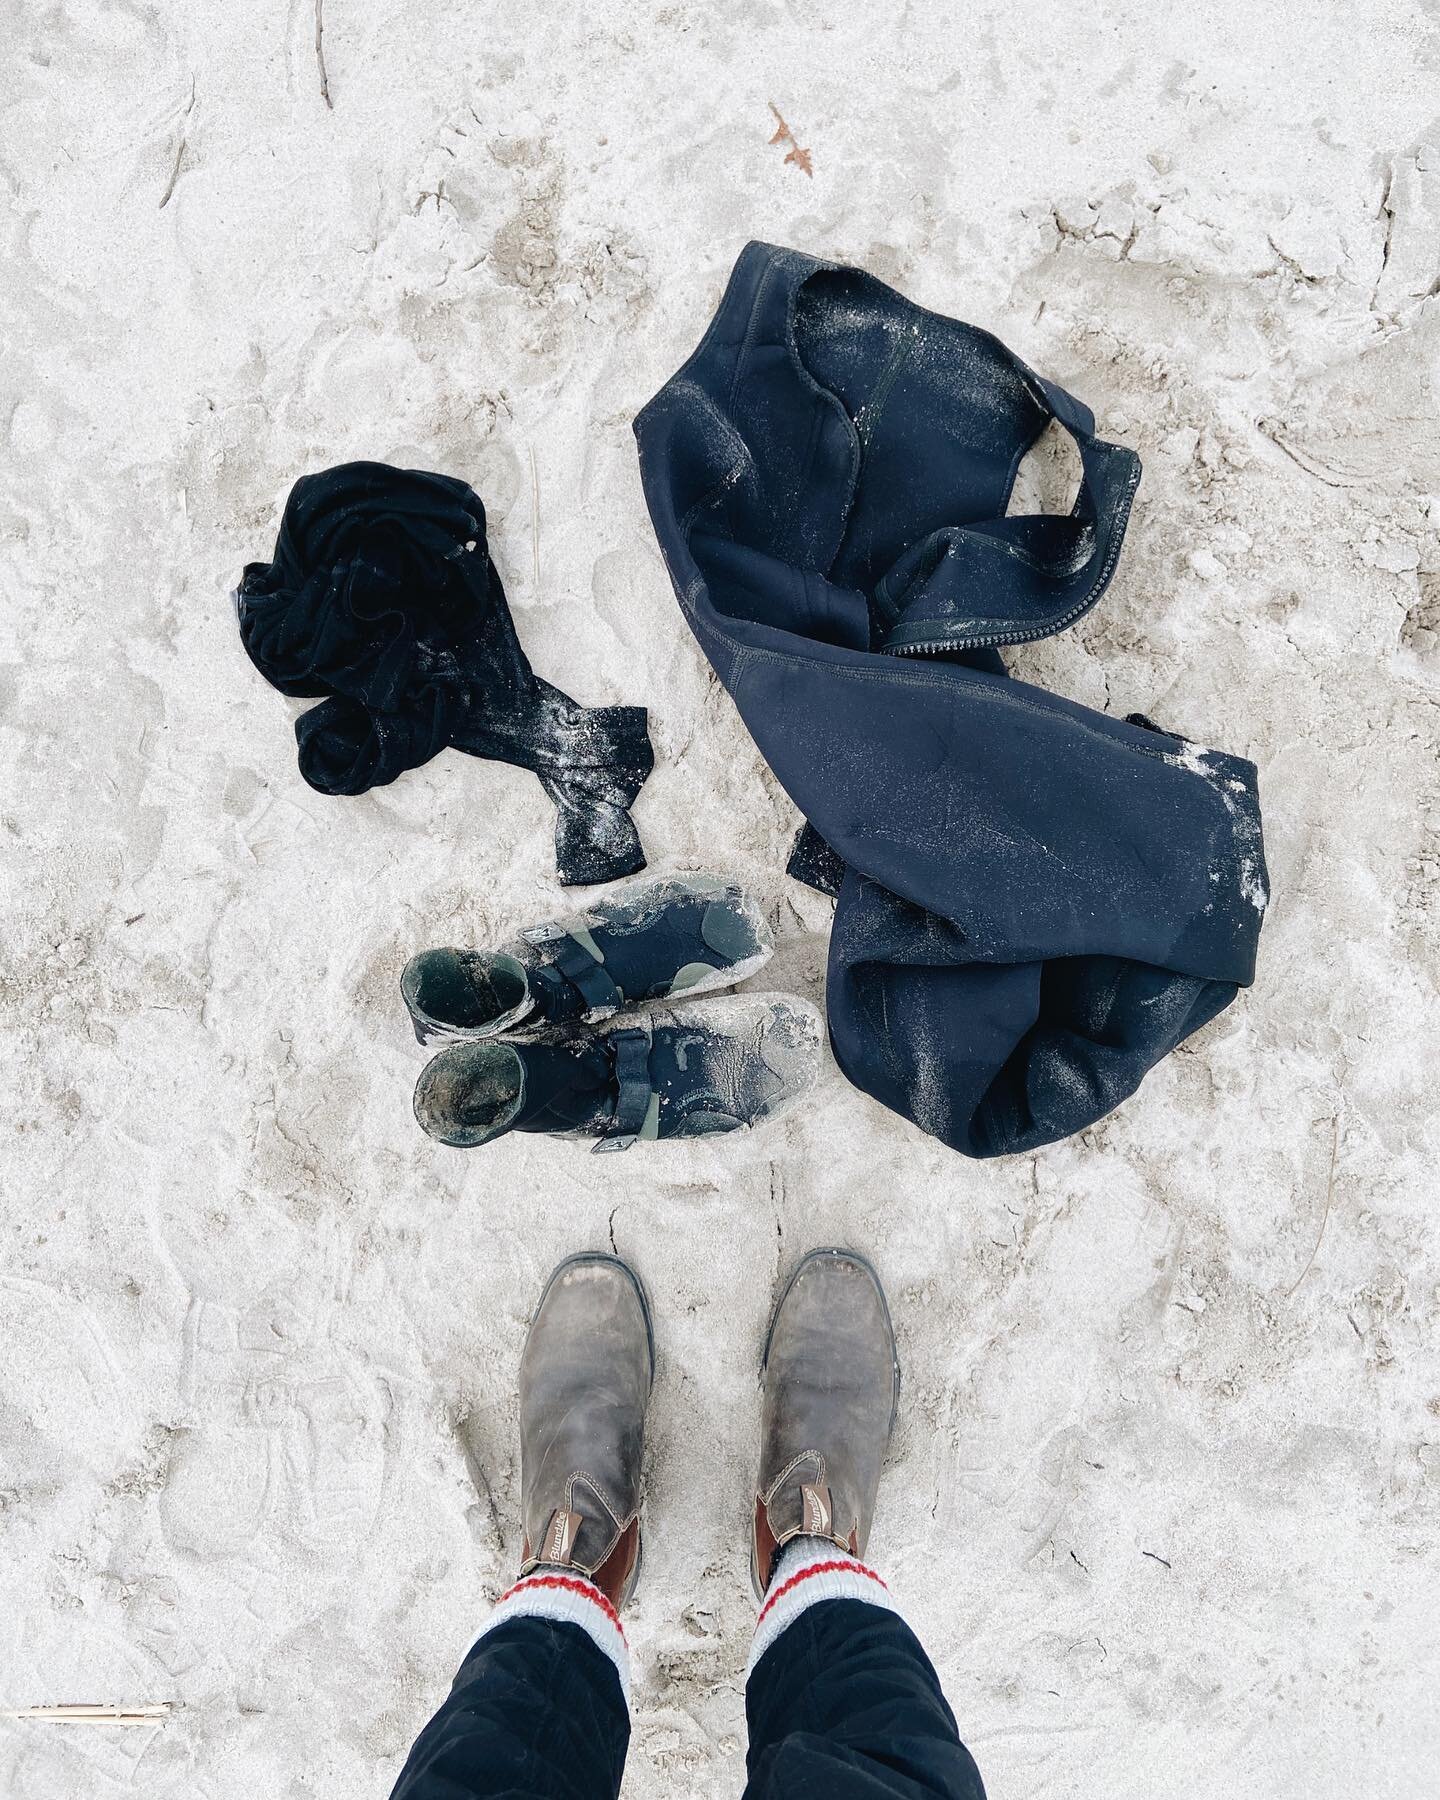 Signs of a successful winter shoot 👌.
.
I&rsquo;ll be posting the story behind the winter shoot on the Georgian bay print shop blog soon, but the most important part is that I&rsquo;ll be posting the full winter collection for sale on Friday morning